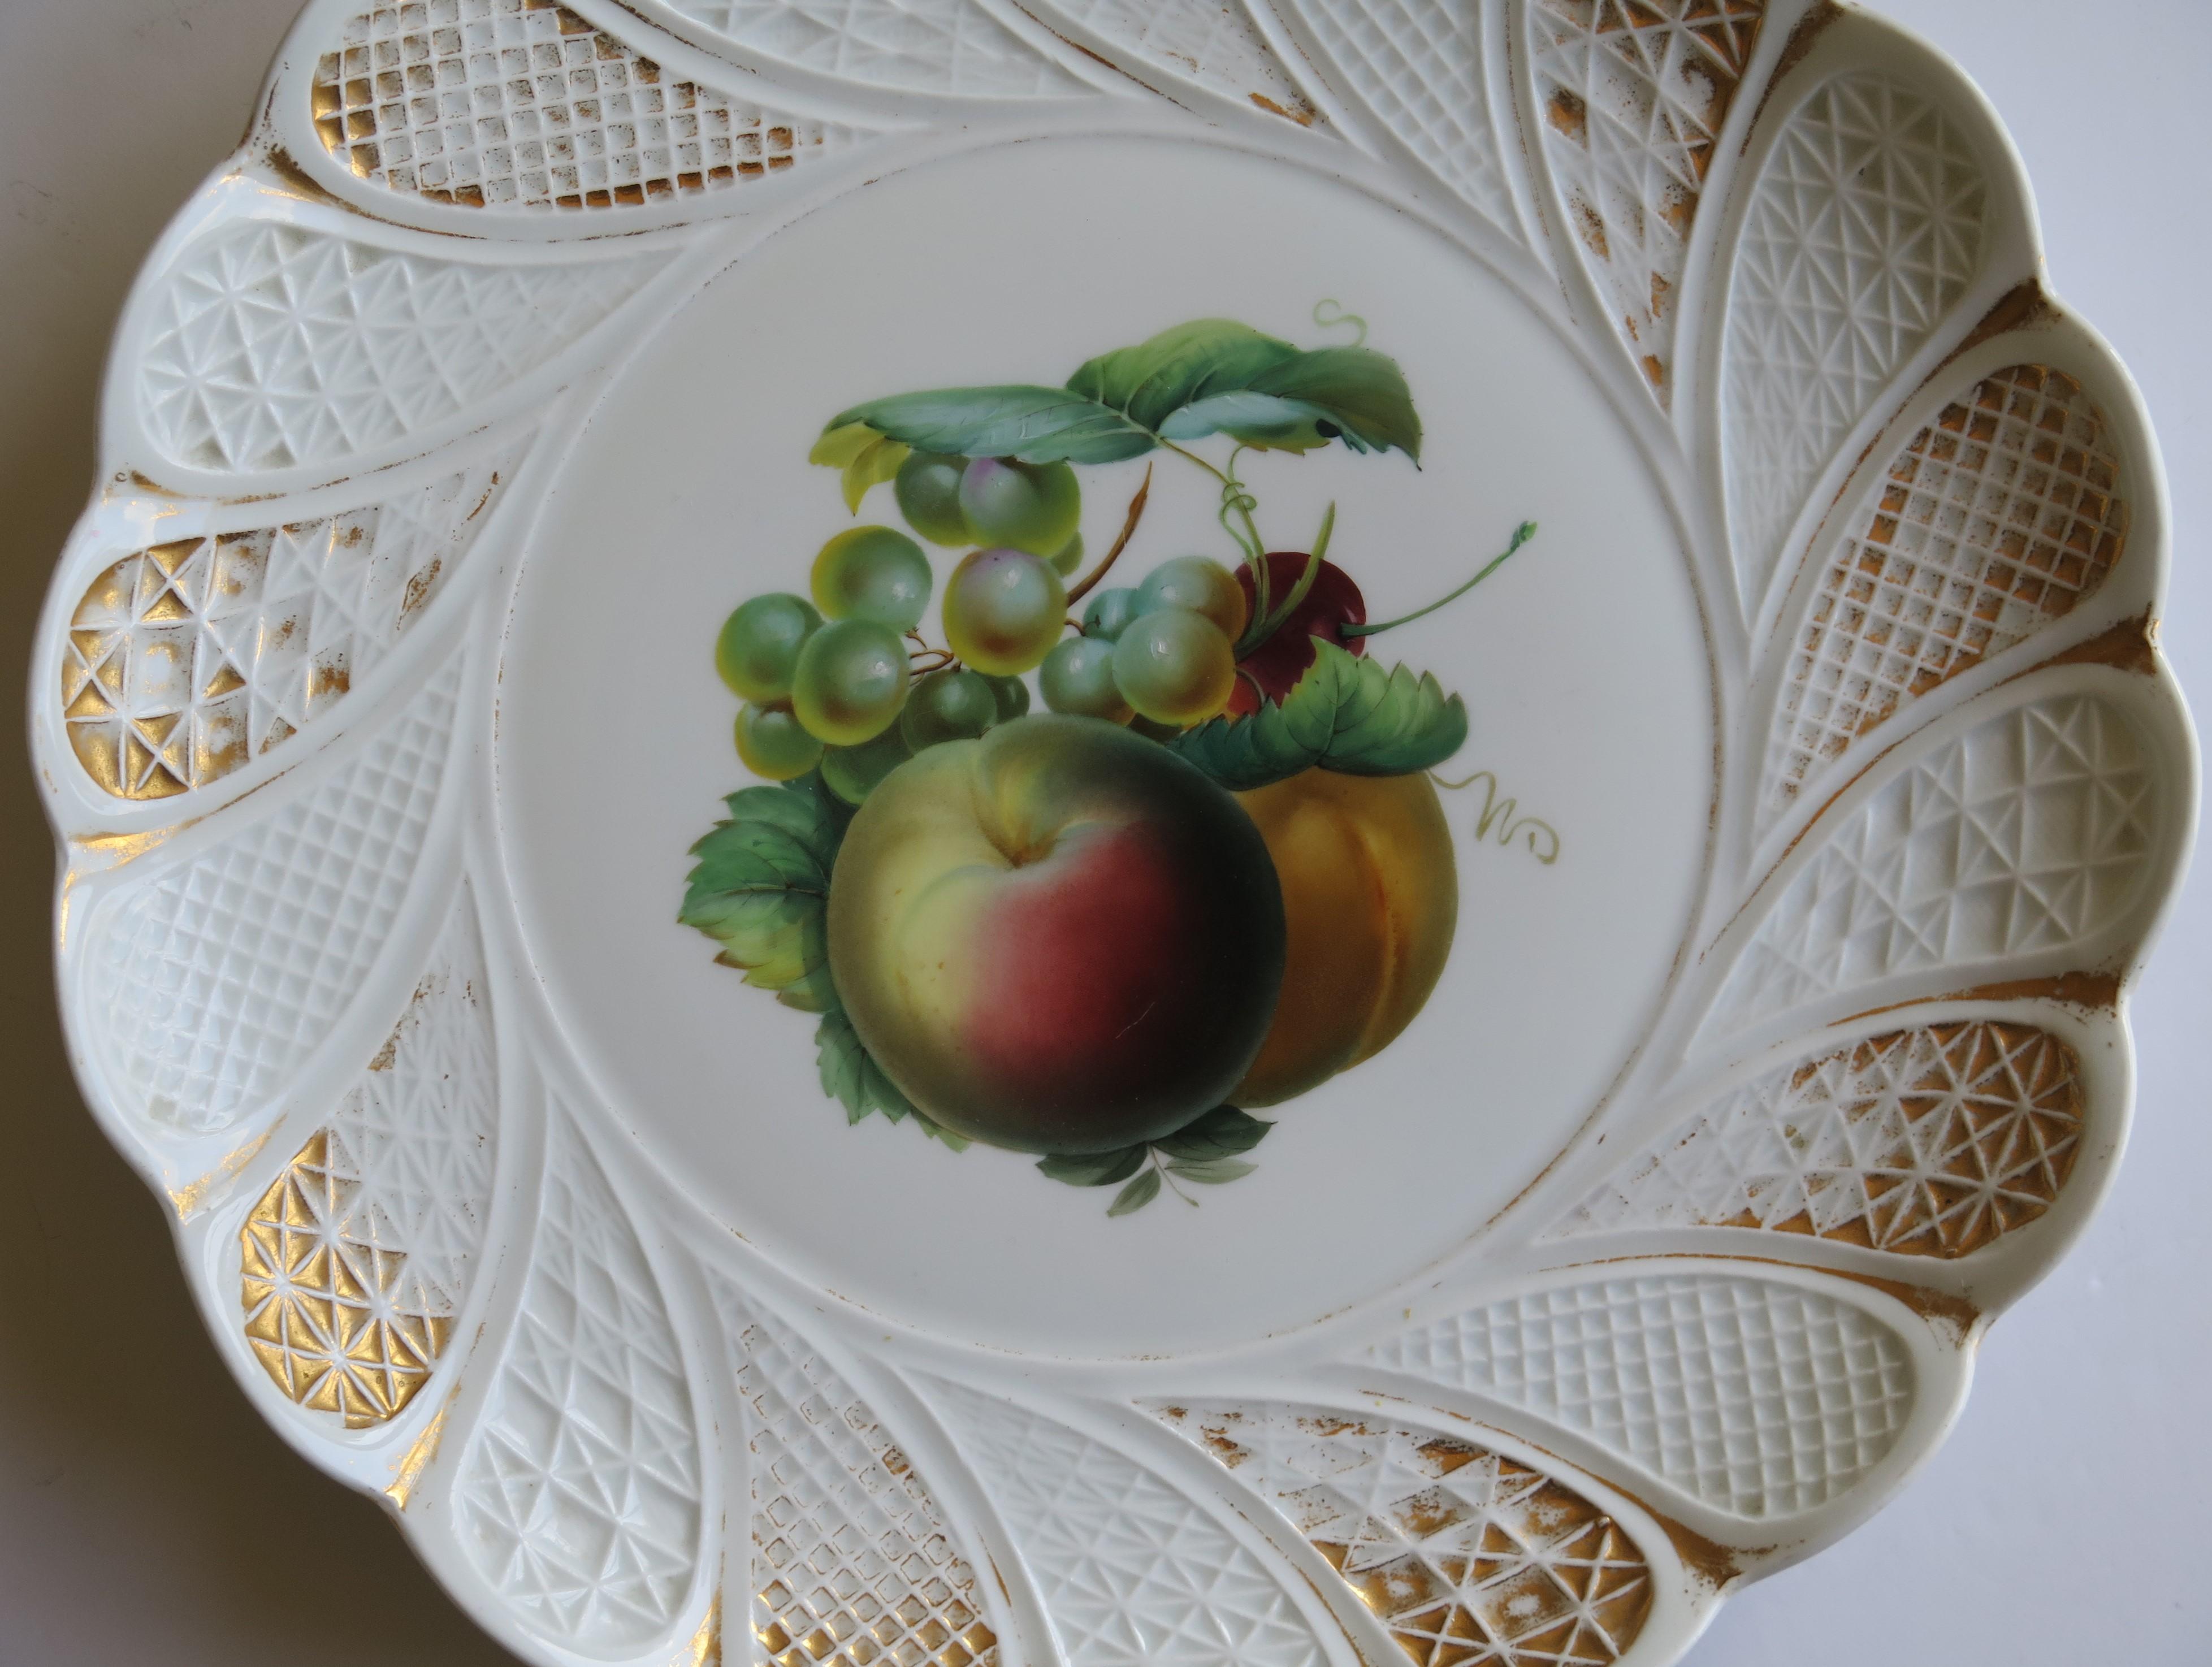 This is a beautiful large plate or charger with a finely hand painted pattern by the Meissen factory in fine white porcelain and dating to the 19th century, circa 1870.

The plate has a wavy rim with a moulded spiral lattice border and sits on a